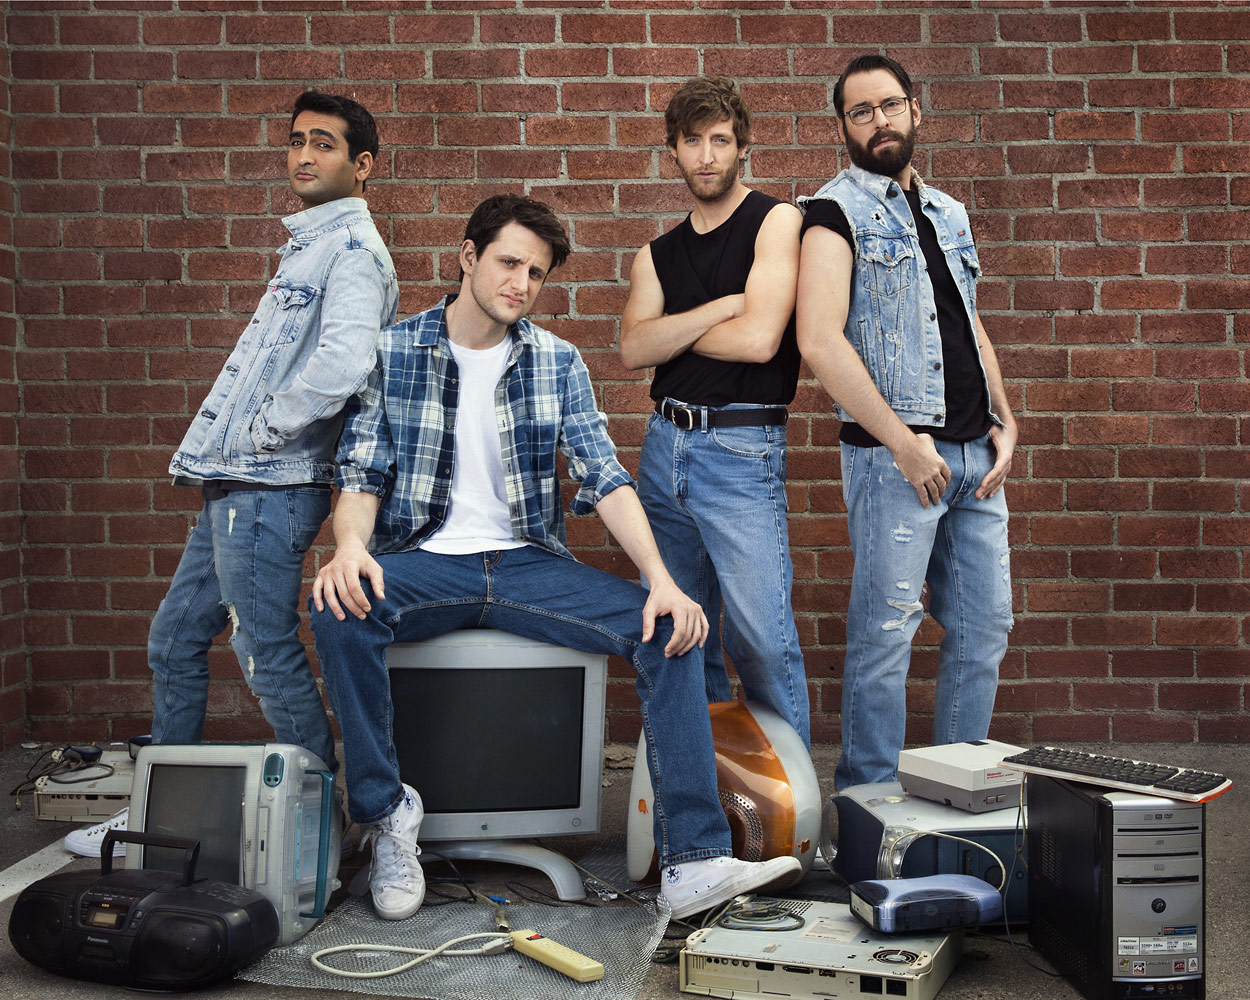 The Cast Of Hbo’s "Silicon Valley" As "The Outsiders", ...